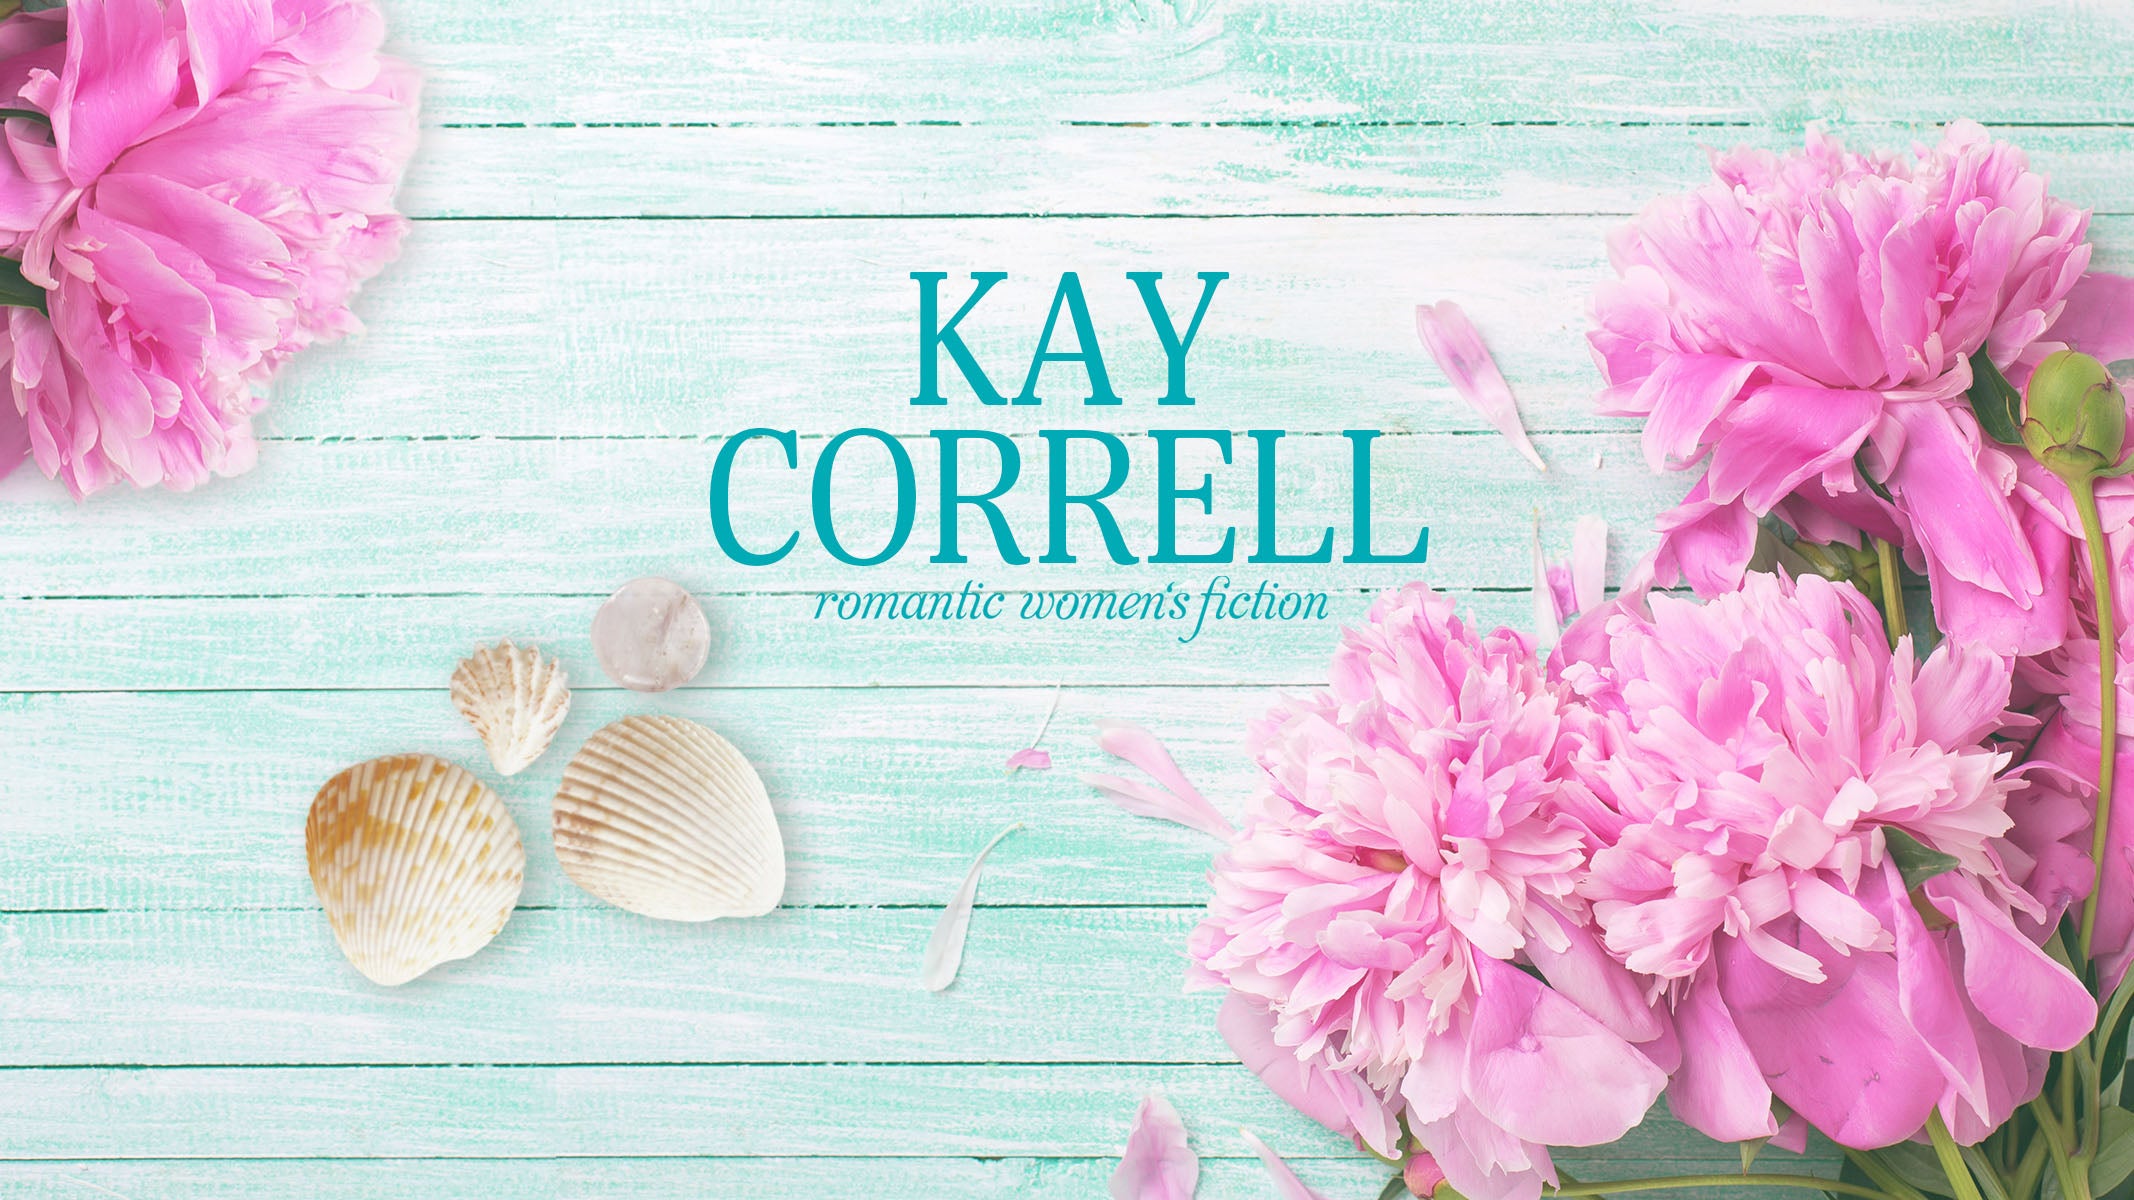 Kay Correll - USA Today bestselling author of romantic women's fiction